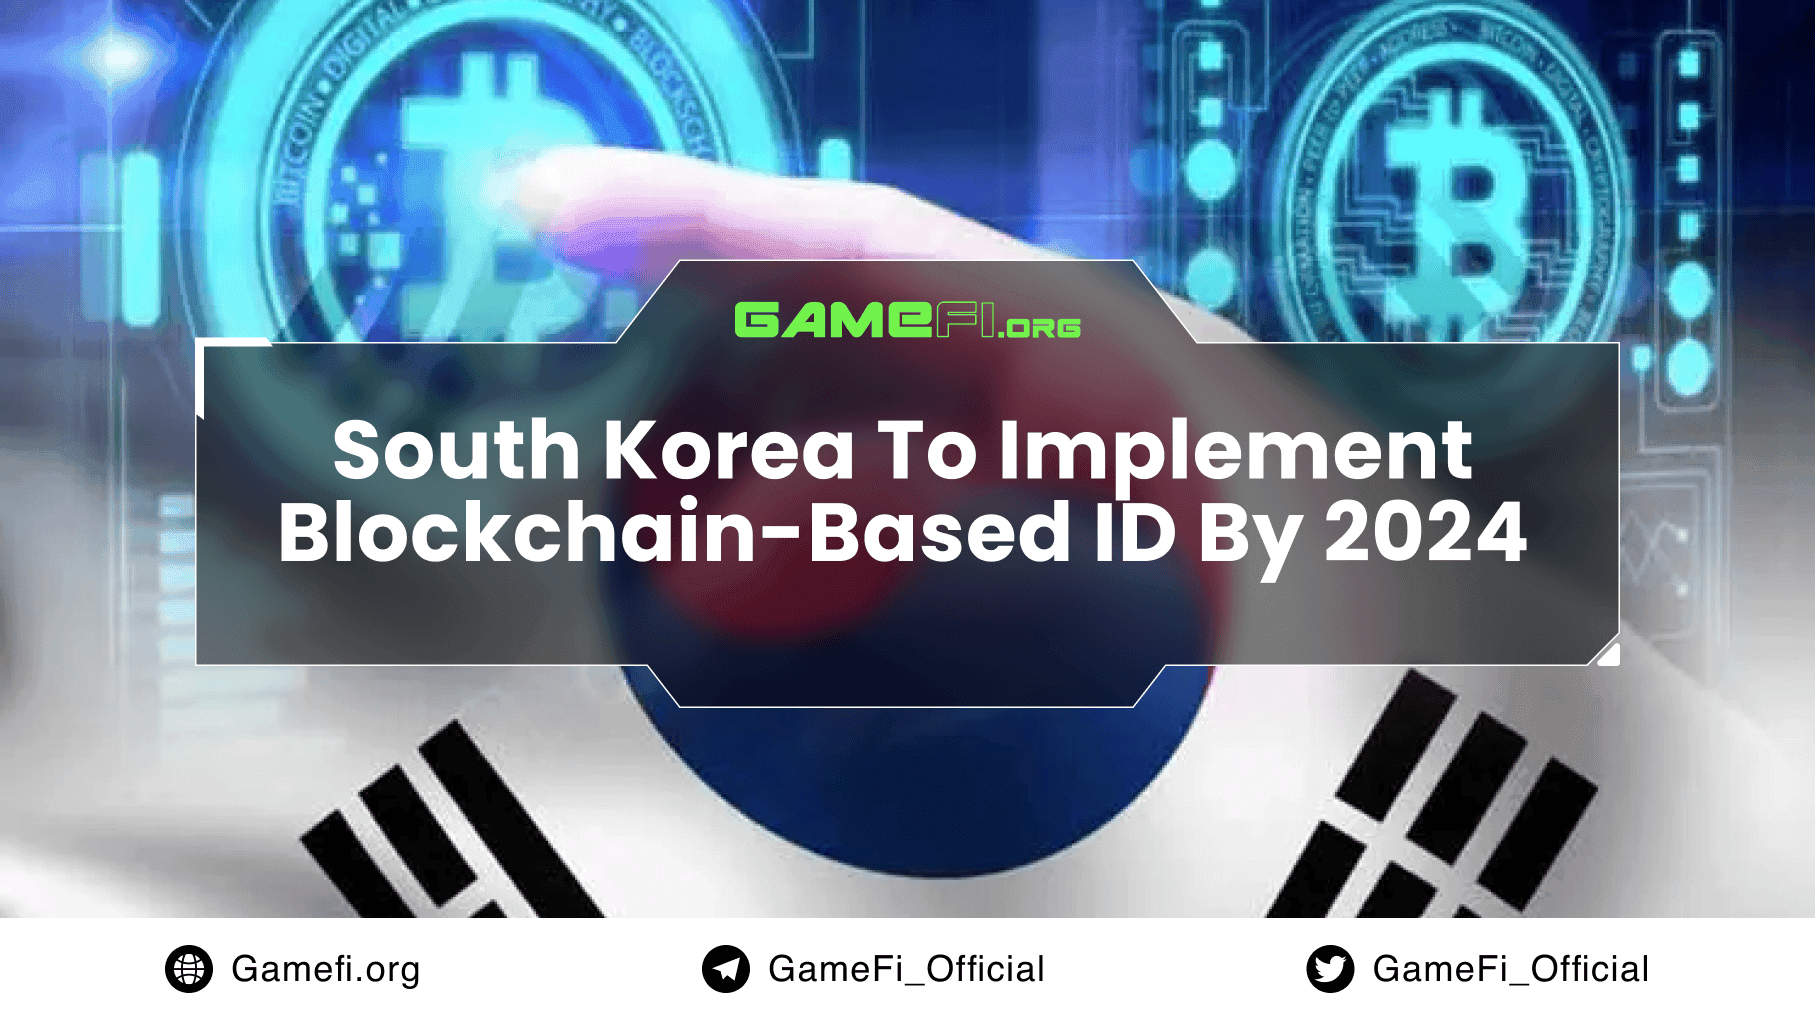 South Korea Plans to Implement Blockchain-based ID by 2024